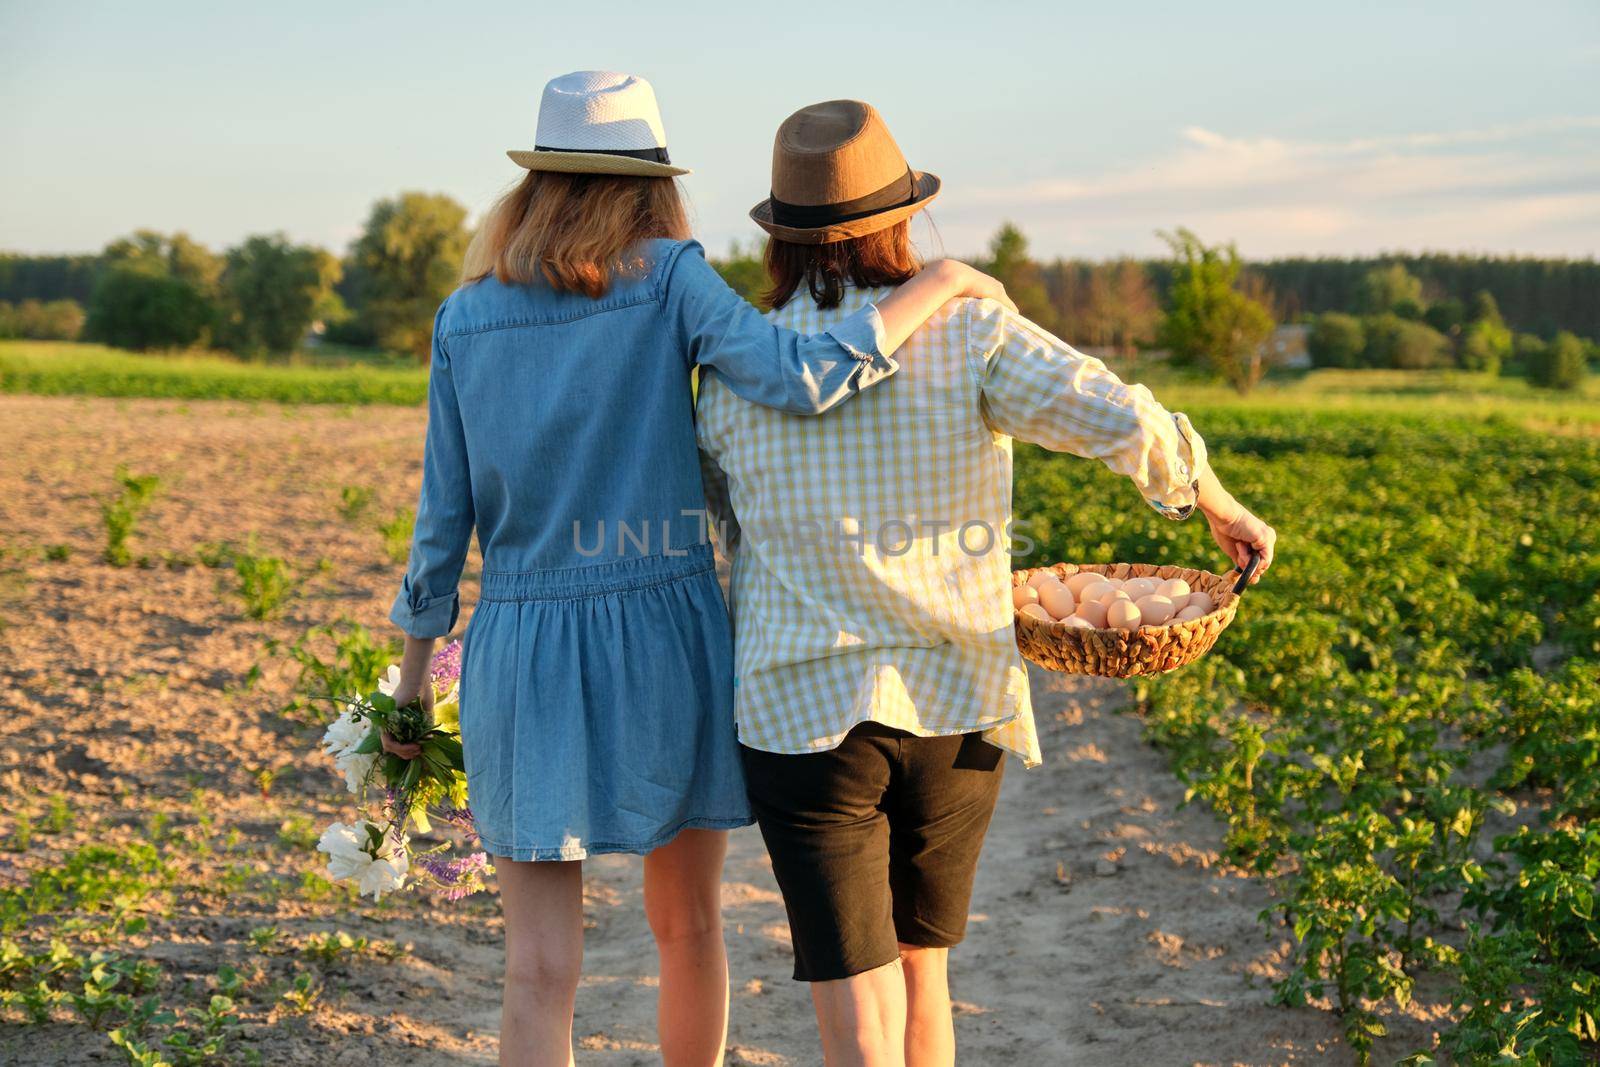 Agriculture, farming organic eco products. Women mother and daughter with basket of eggs, lifestyle, nature, garden, sunset, country side background, back view